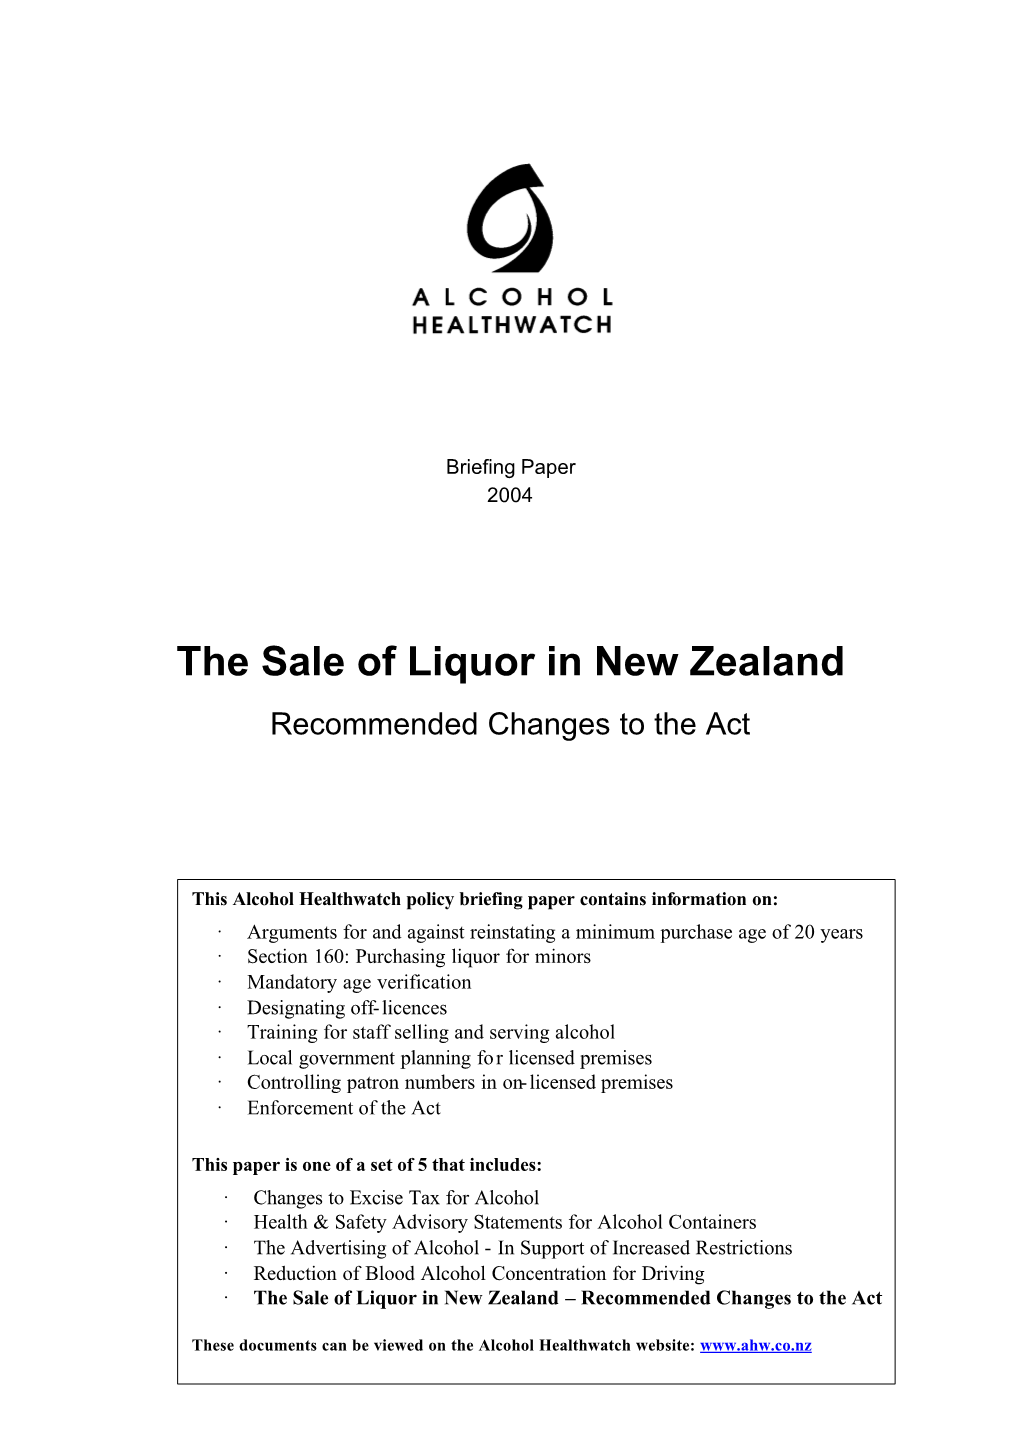 The Sale of Liquor in New Zealand, Recommended Changes to The